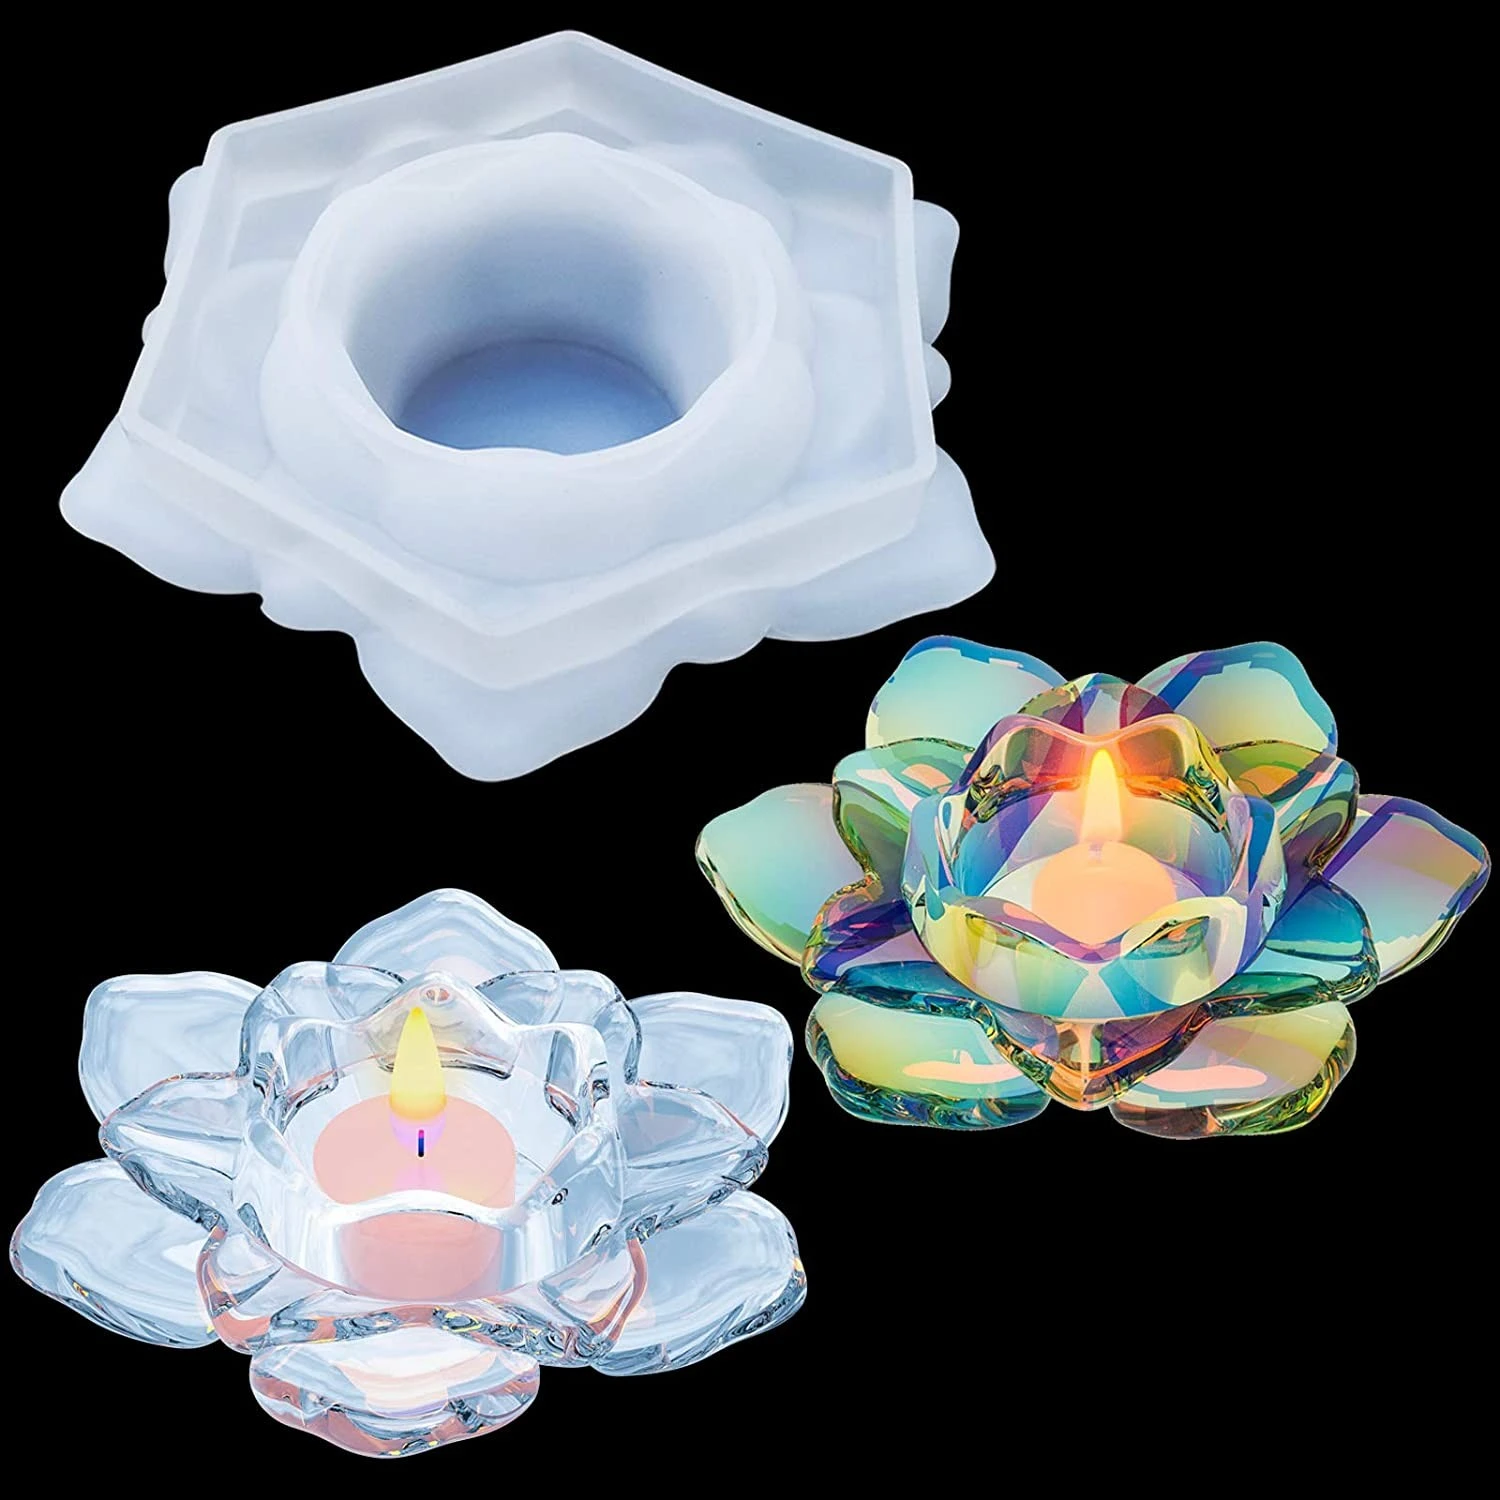 DIY 3D Lotus Candle Holder Silicone Mold Epoxy Resin Flower Candles Holders Mold Craft Decoration Tool DIY At Home Making Tool